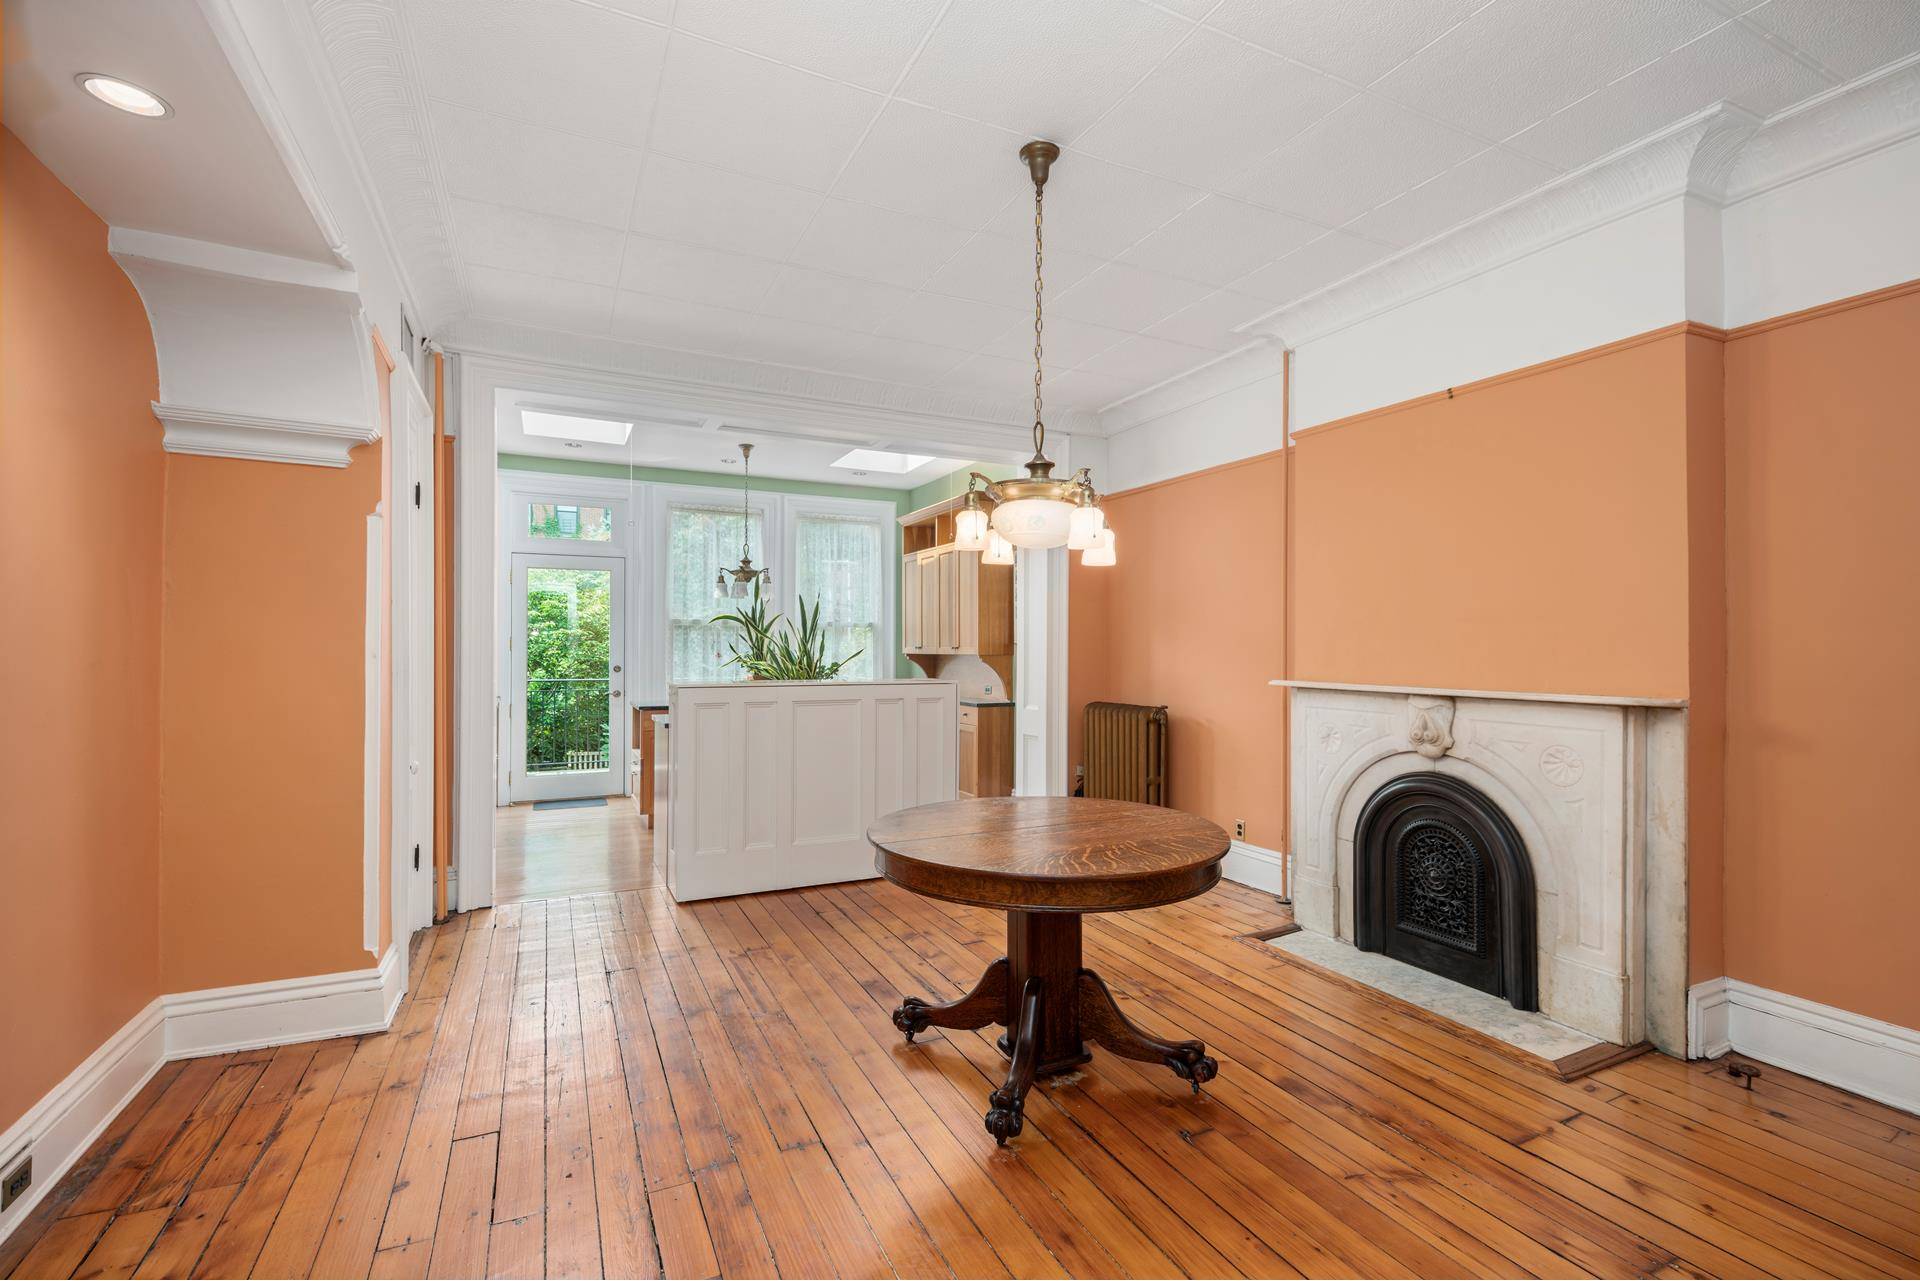 334 President Street is a beautifully preserved Neo Grec brownstone on one of Carroll Gardens most desirable blocks, right off Smith Street with the Carroll Street subway station on the ...